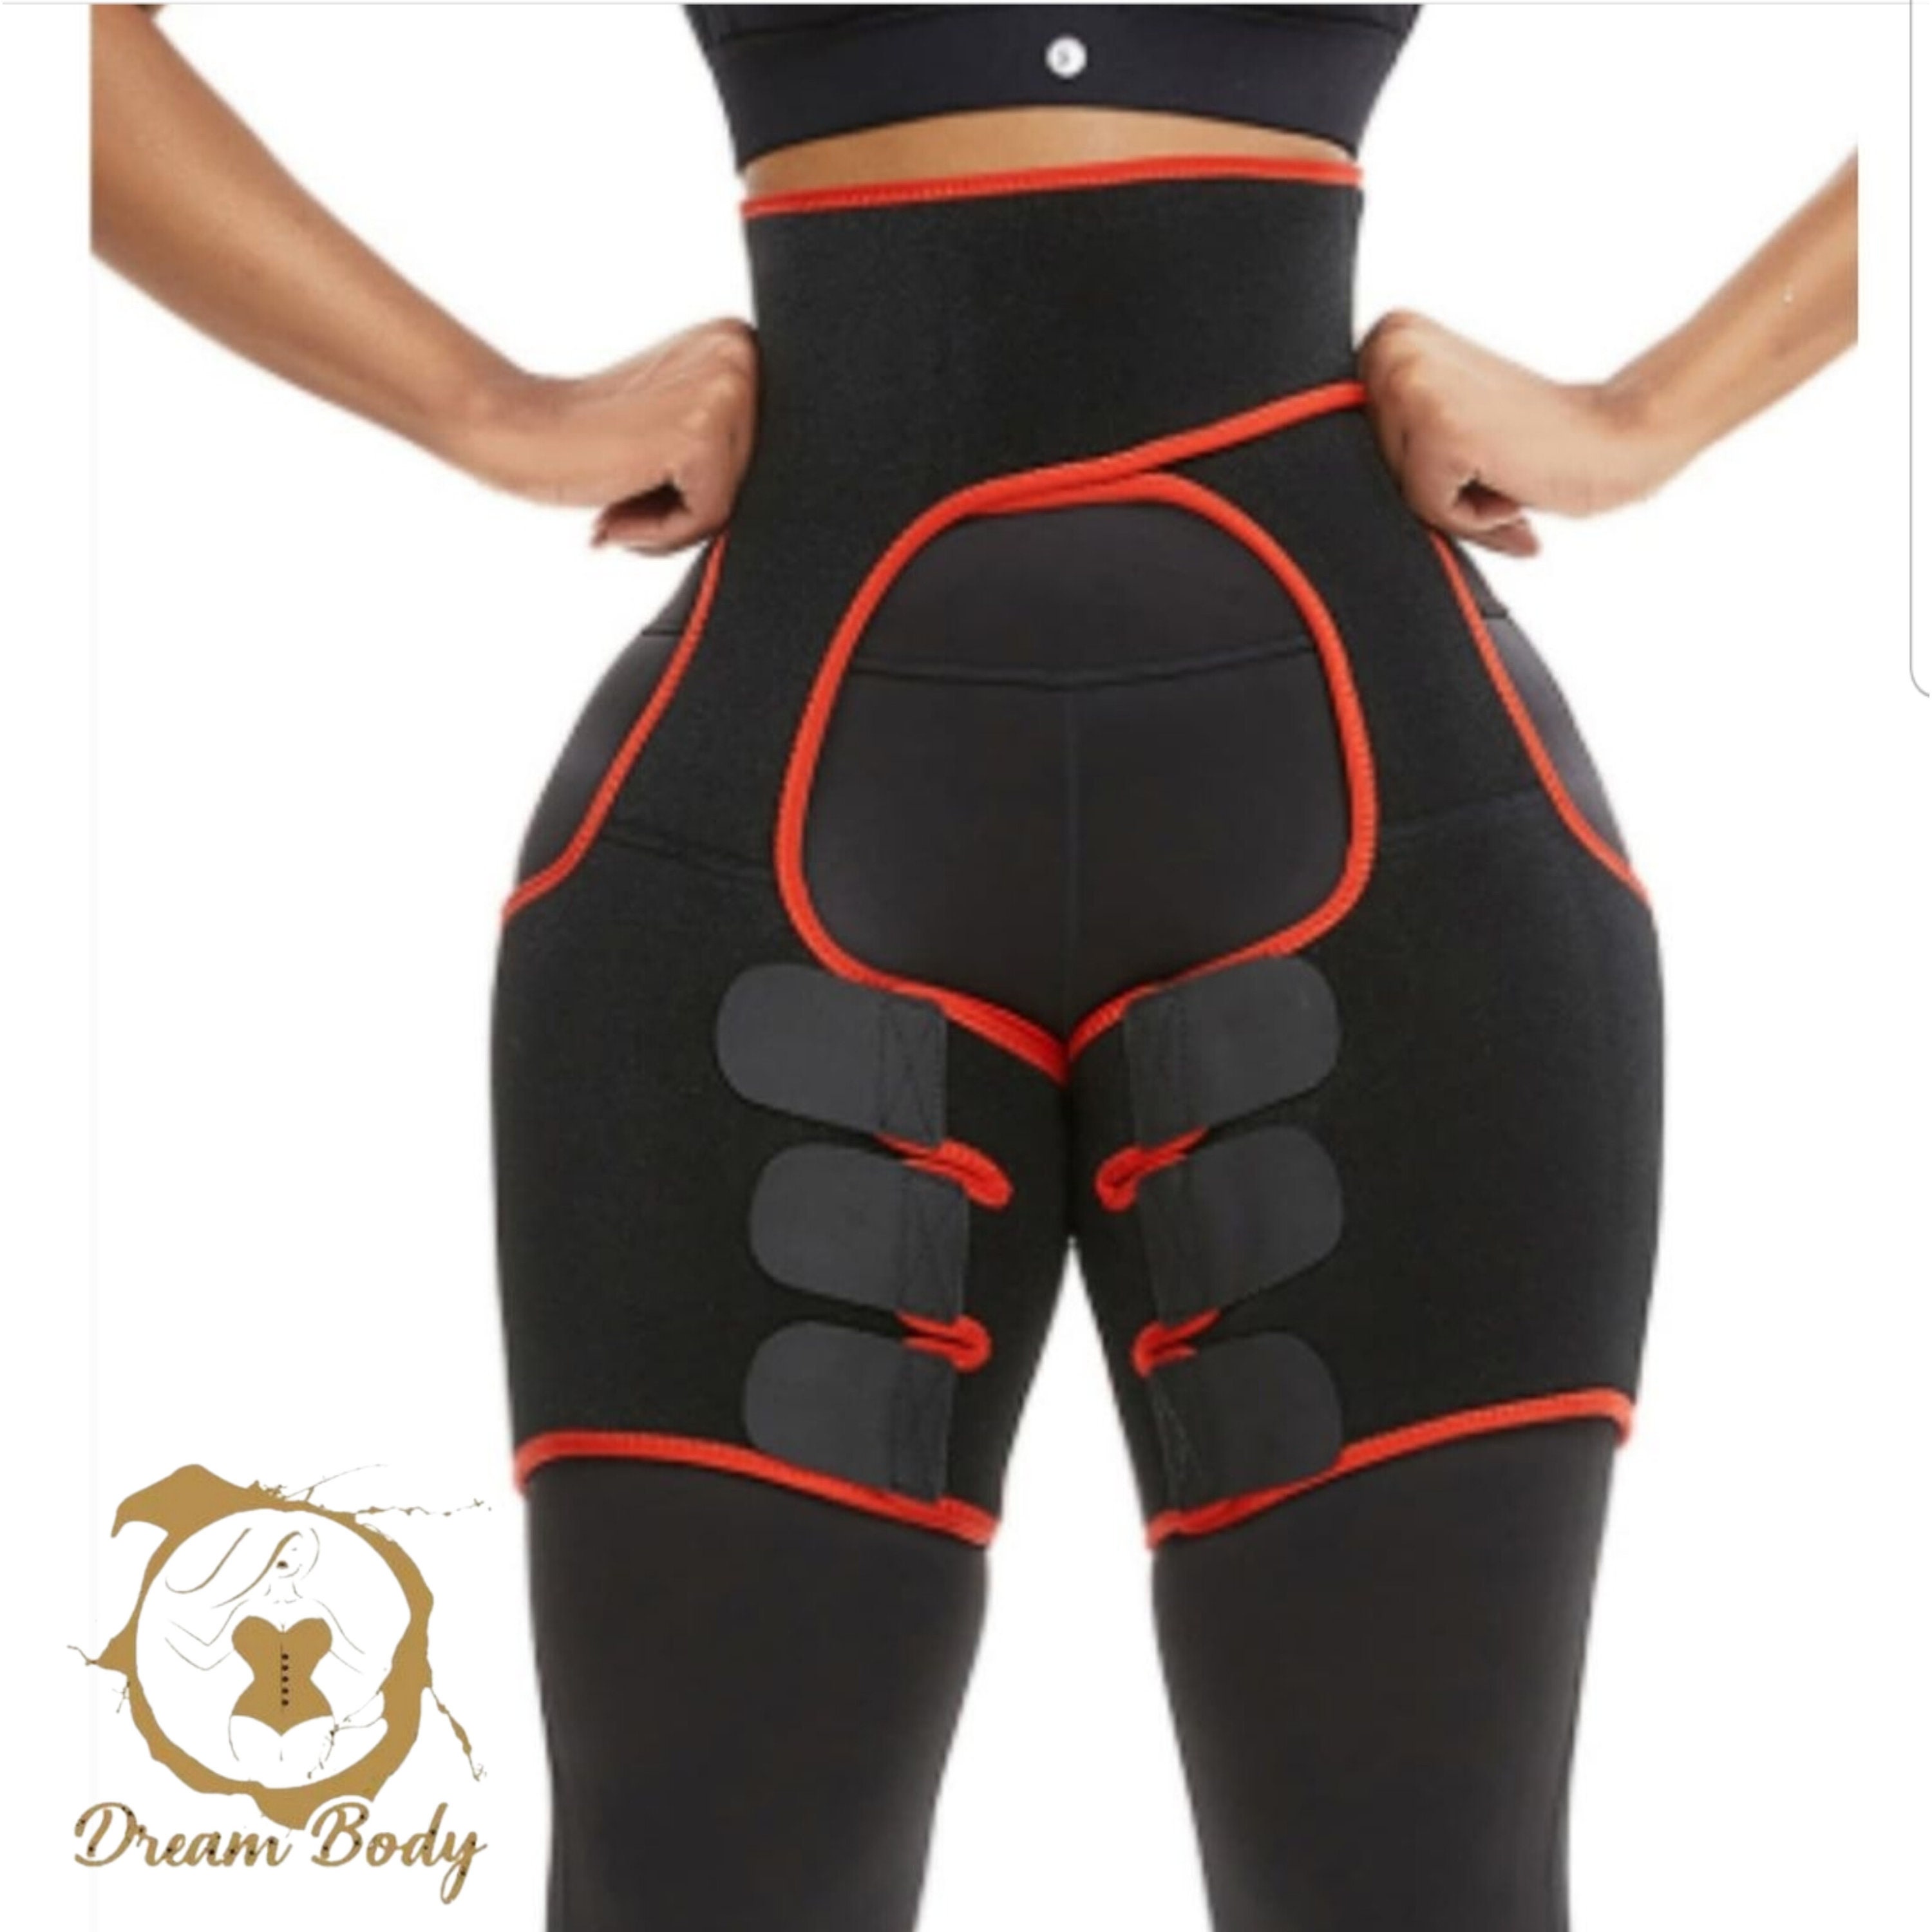 Buy Thigh Shaper Online In India -  India